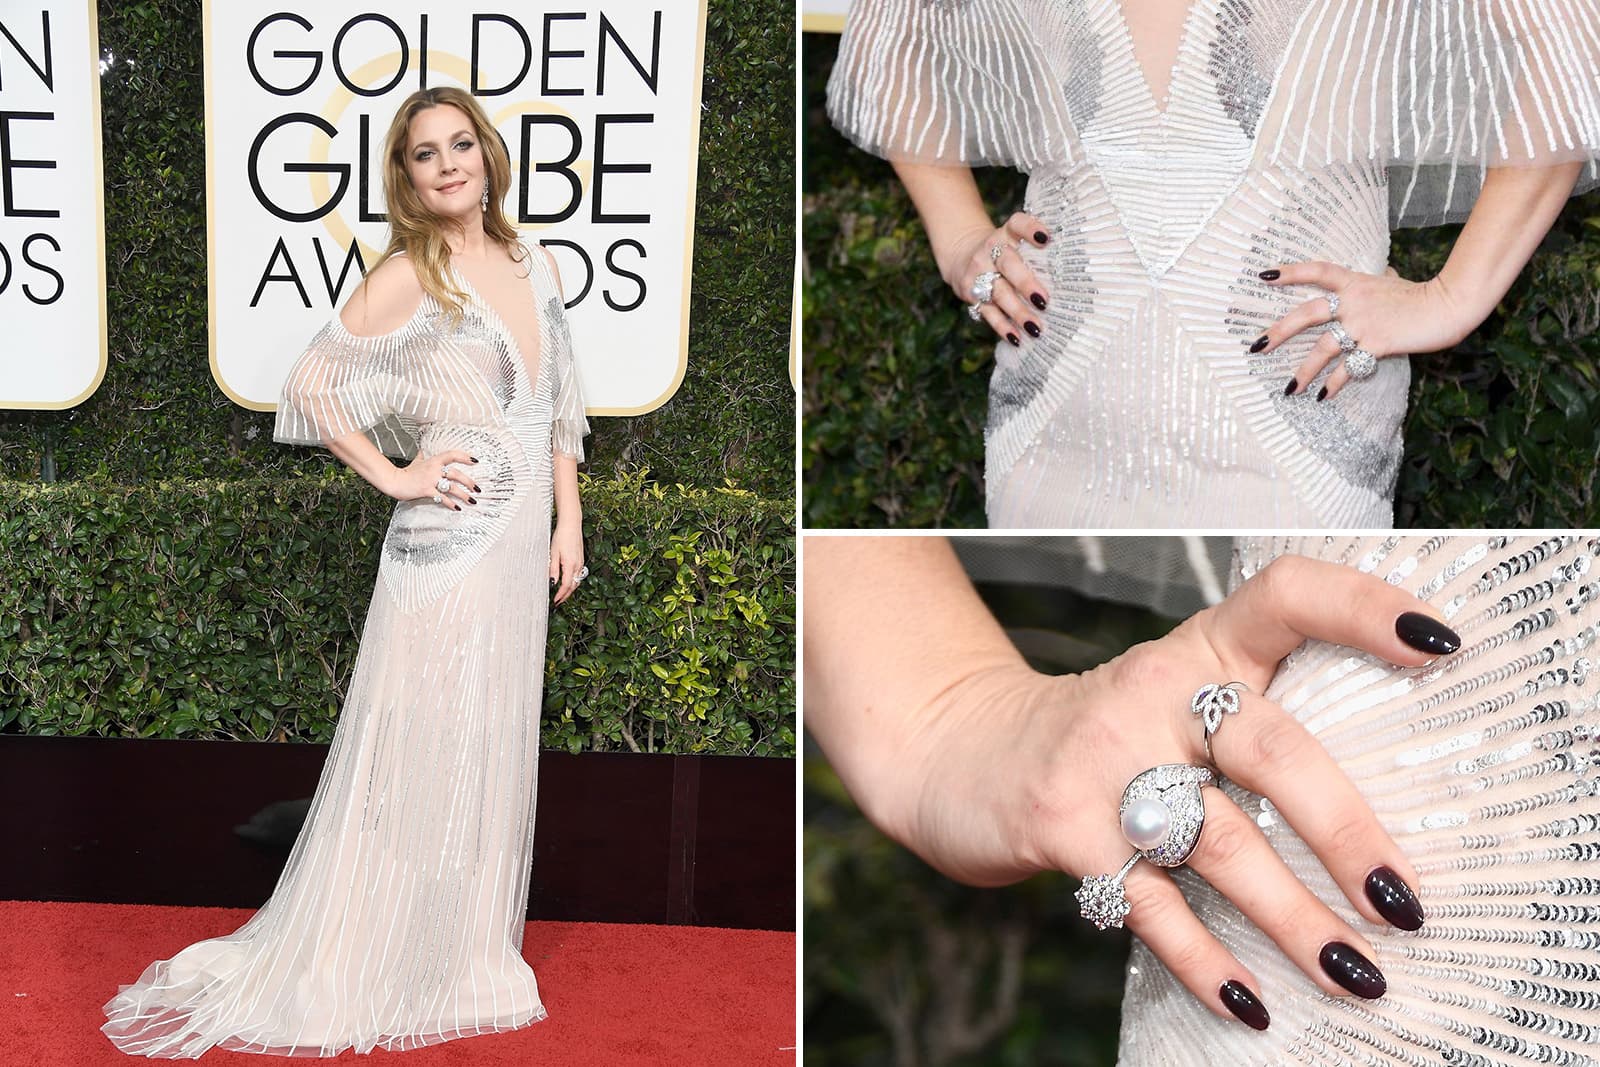 Drew Barrymore at the 2017 Golden Globe Awards with a dizzying array of cocktail rings